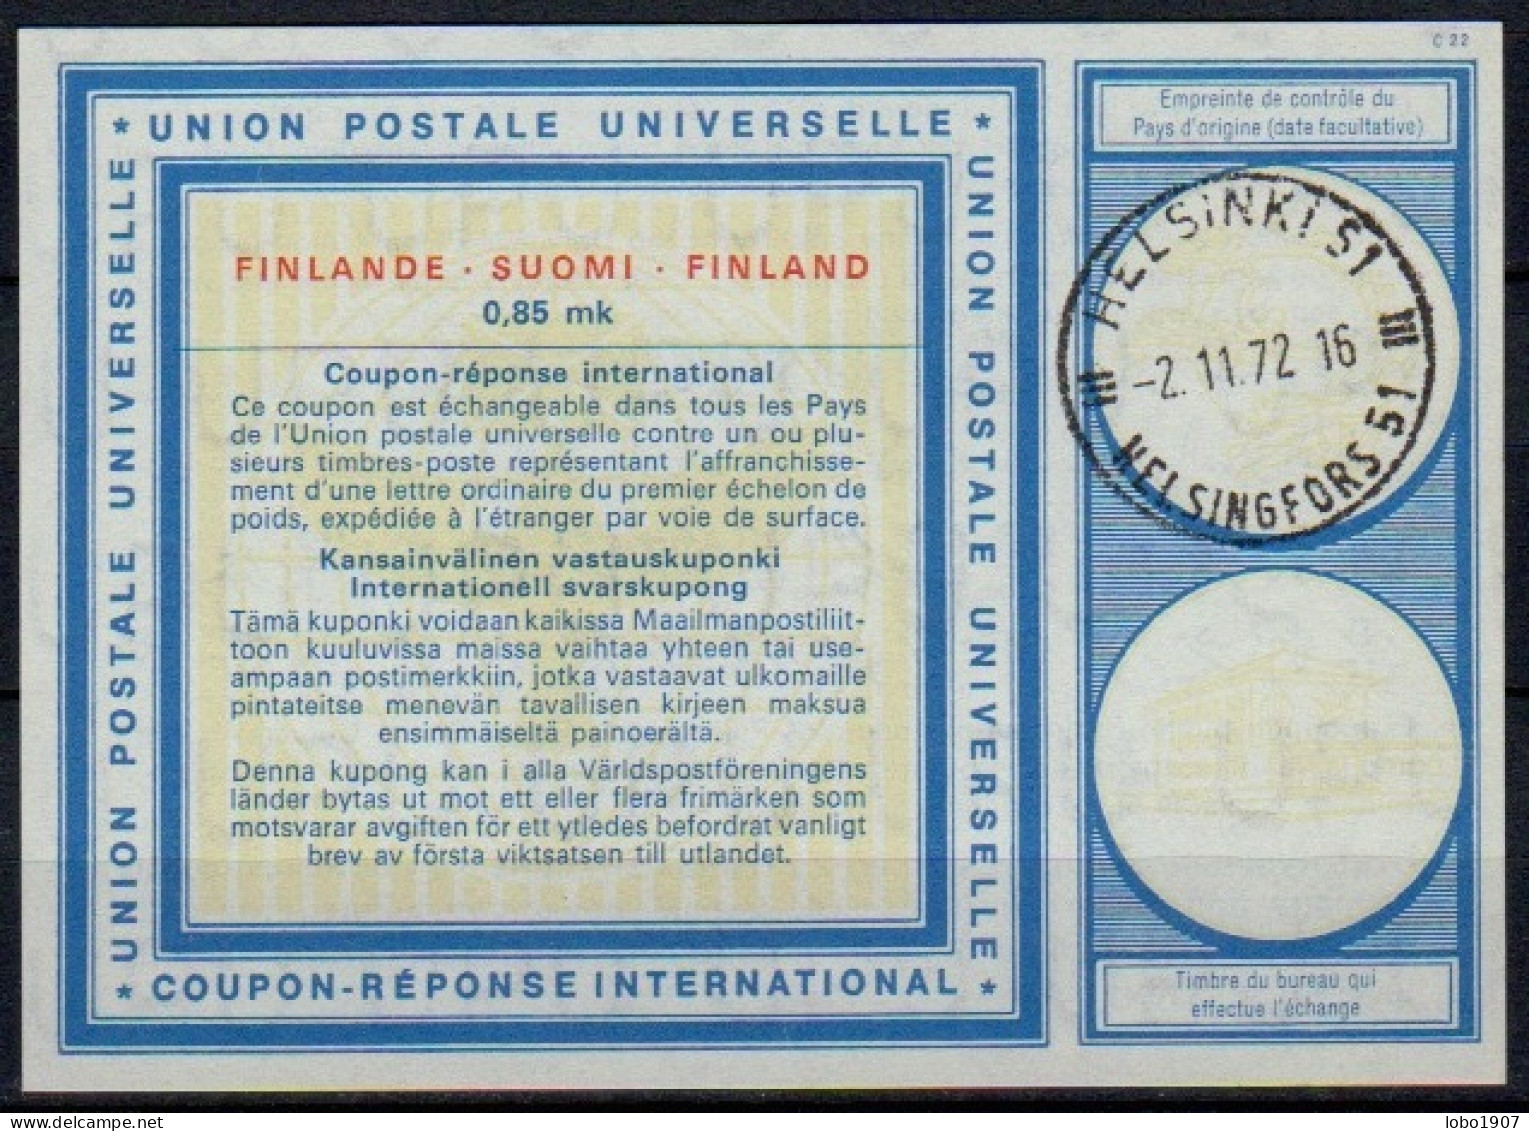 FINLAND and ALAND Collection 23 International Reply Coupon Reponse Cupon Respuesta IRC IAS see list / scans of most IRC